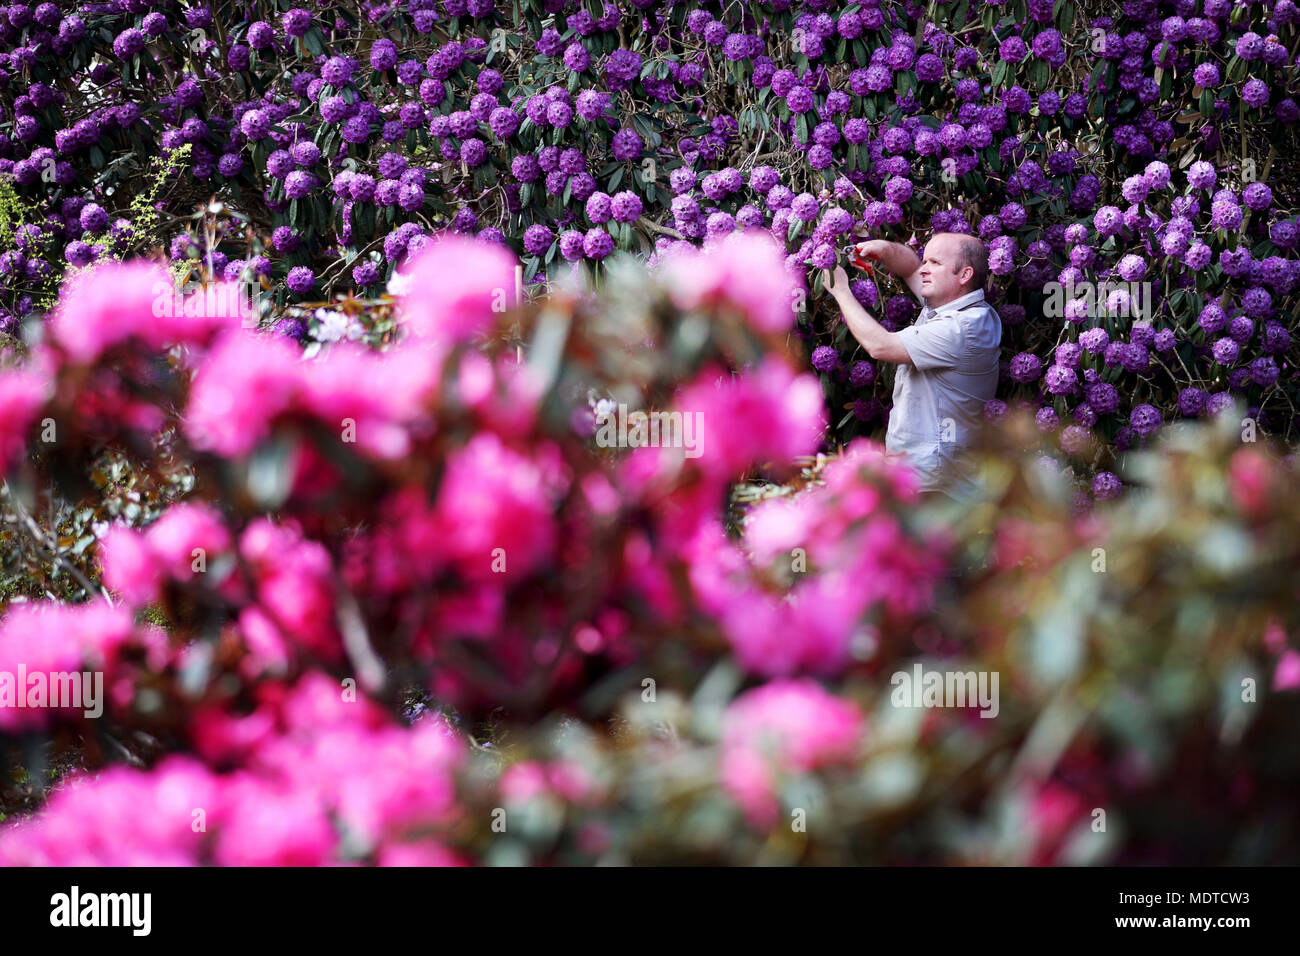 John Dunn, supervisor of the herbaceous department at the Royal Botanic Garden Edinburgh, carries out some pruning on a Rhododendron Niveum which is one of the many plants on display at this year's Scottish Rhododendron Festival. Stock Photo